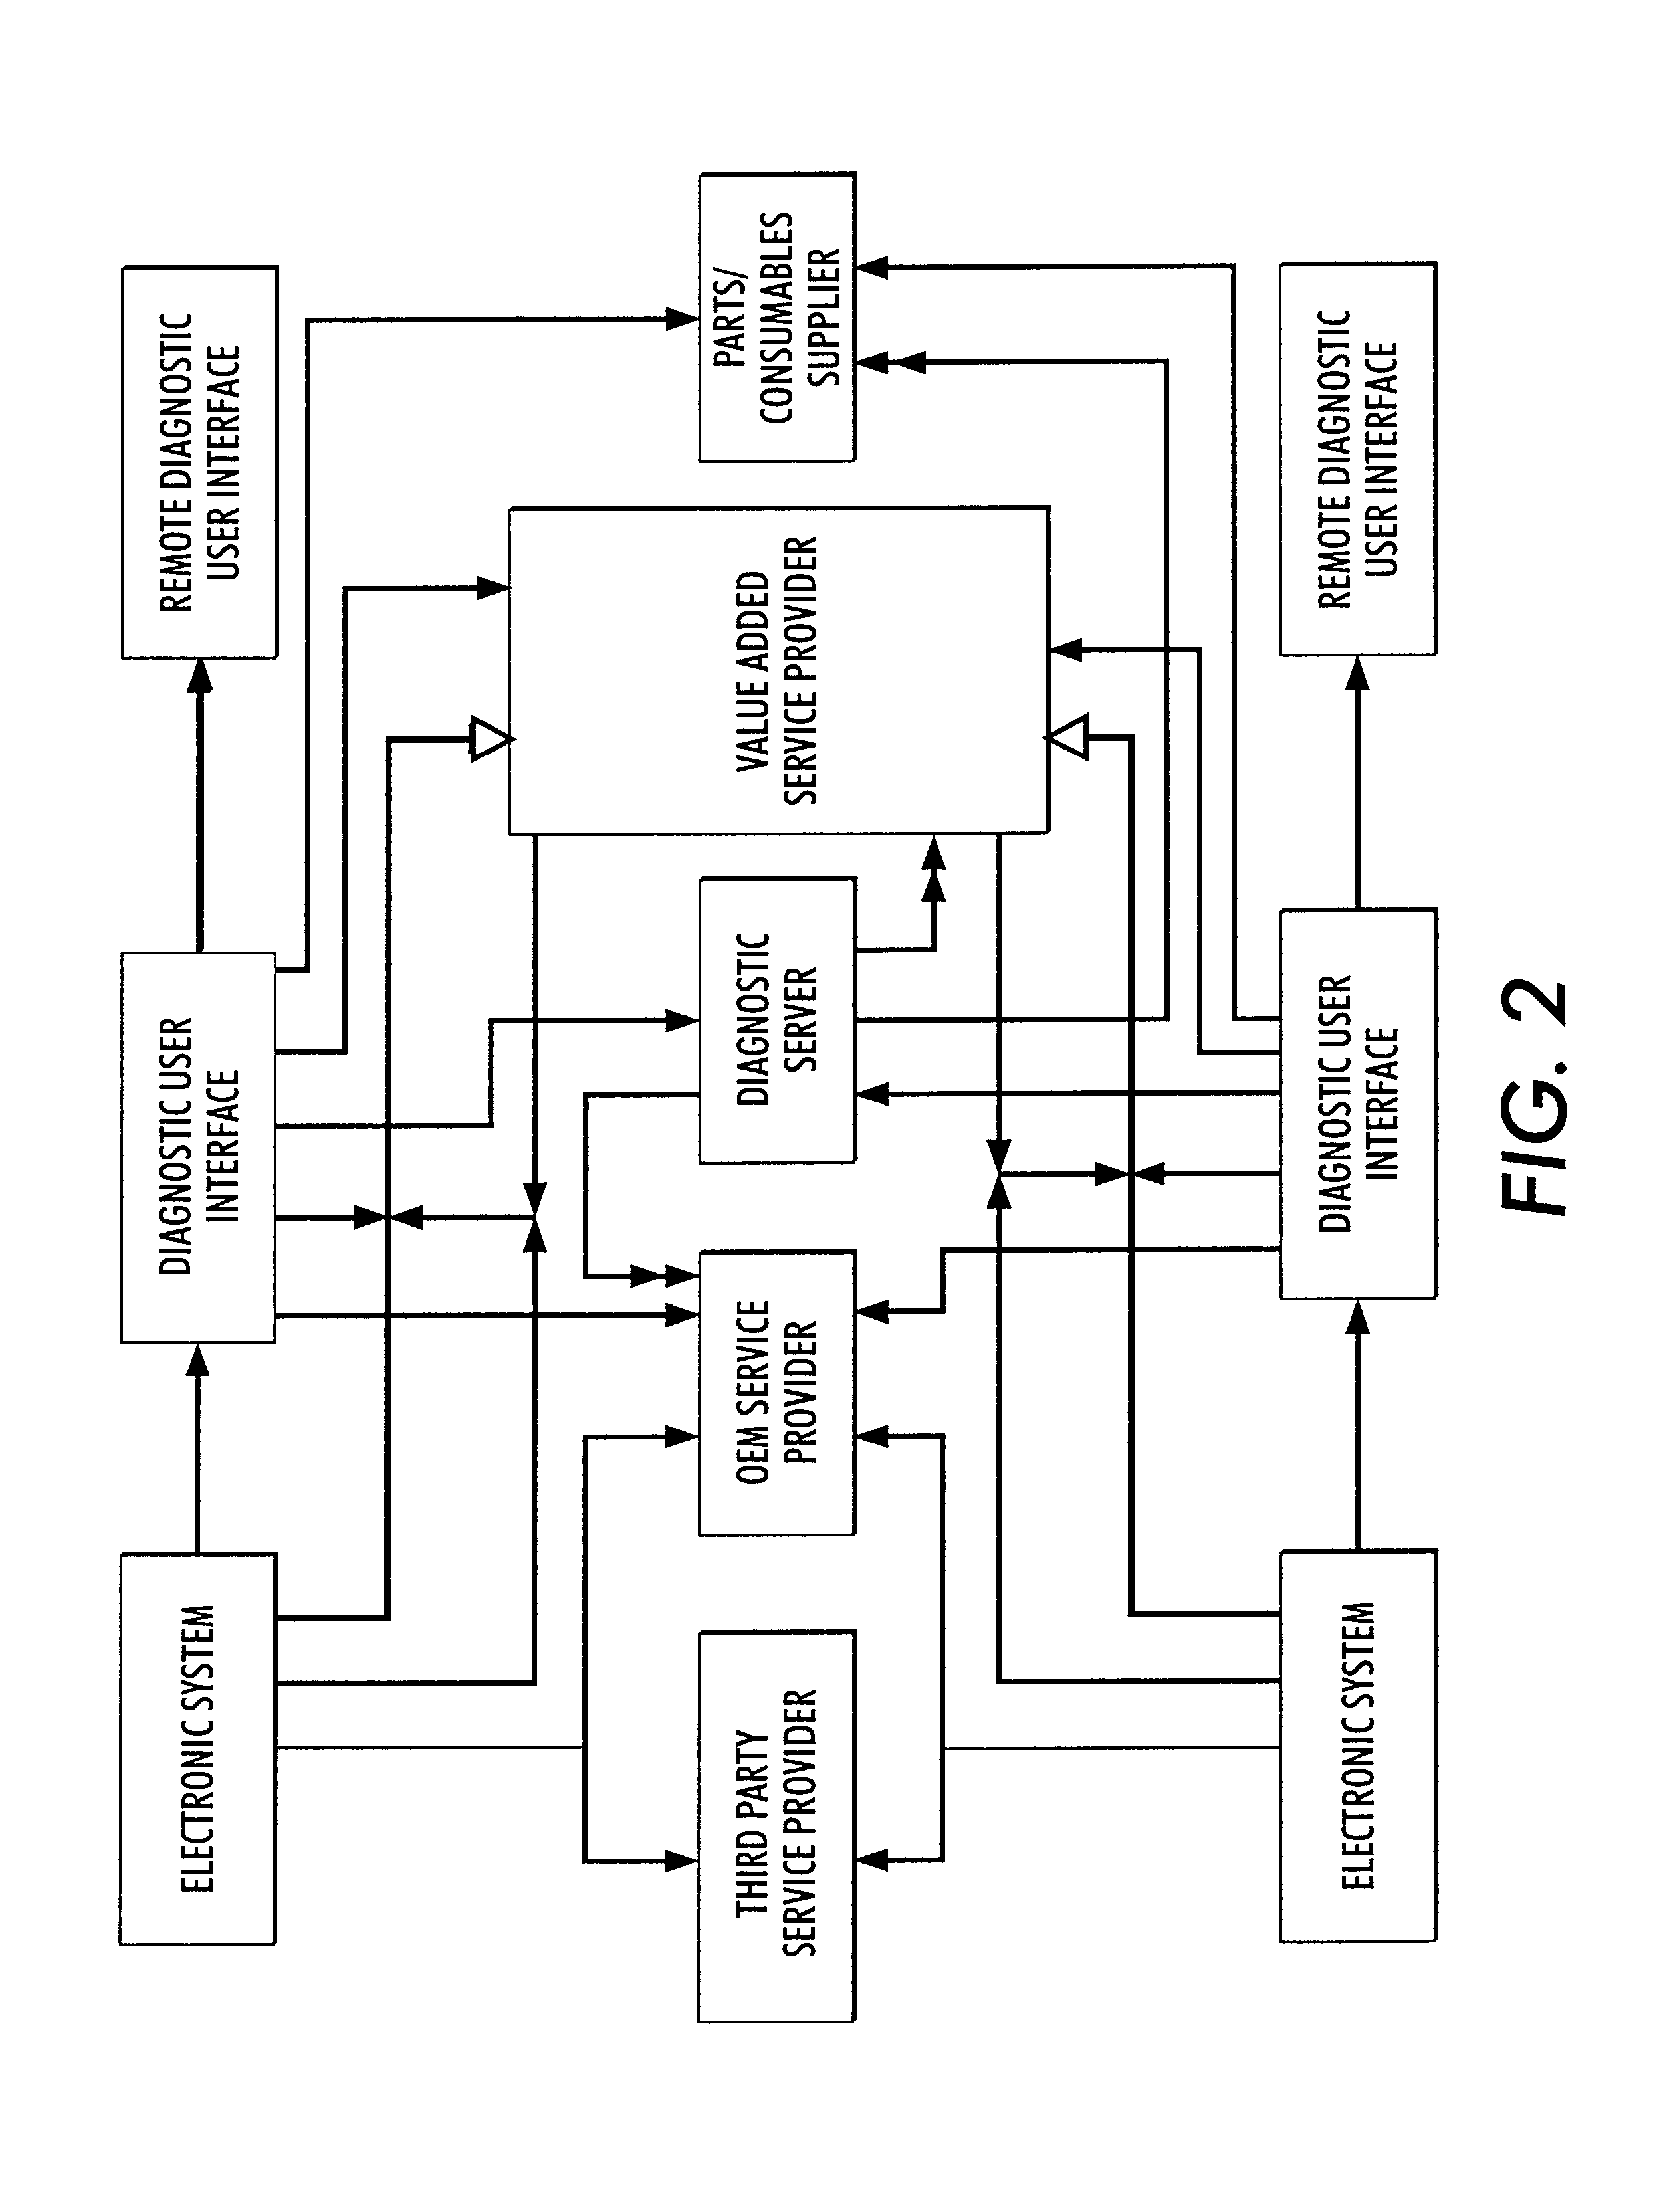 Systems and methods for failure prediction, diagnosis and remediation using data acquisition and feedback for a distributed electronic system